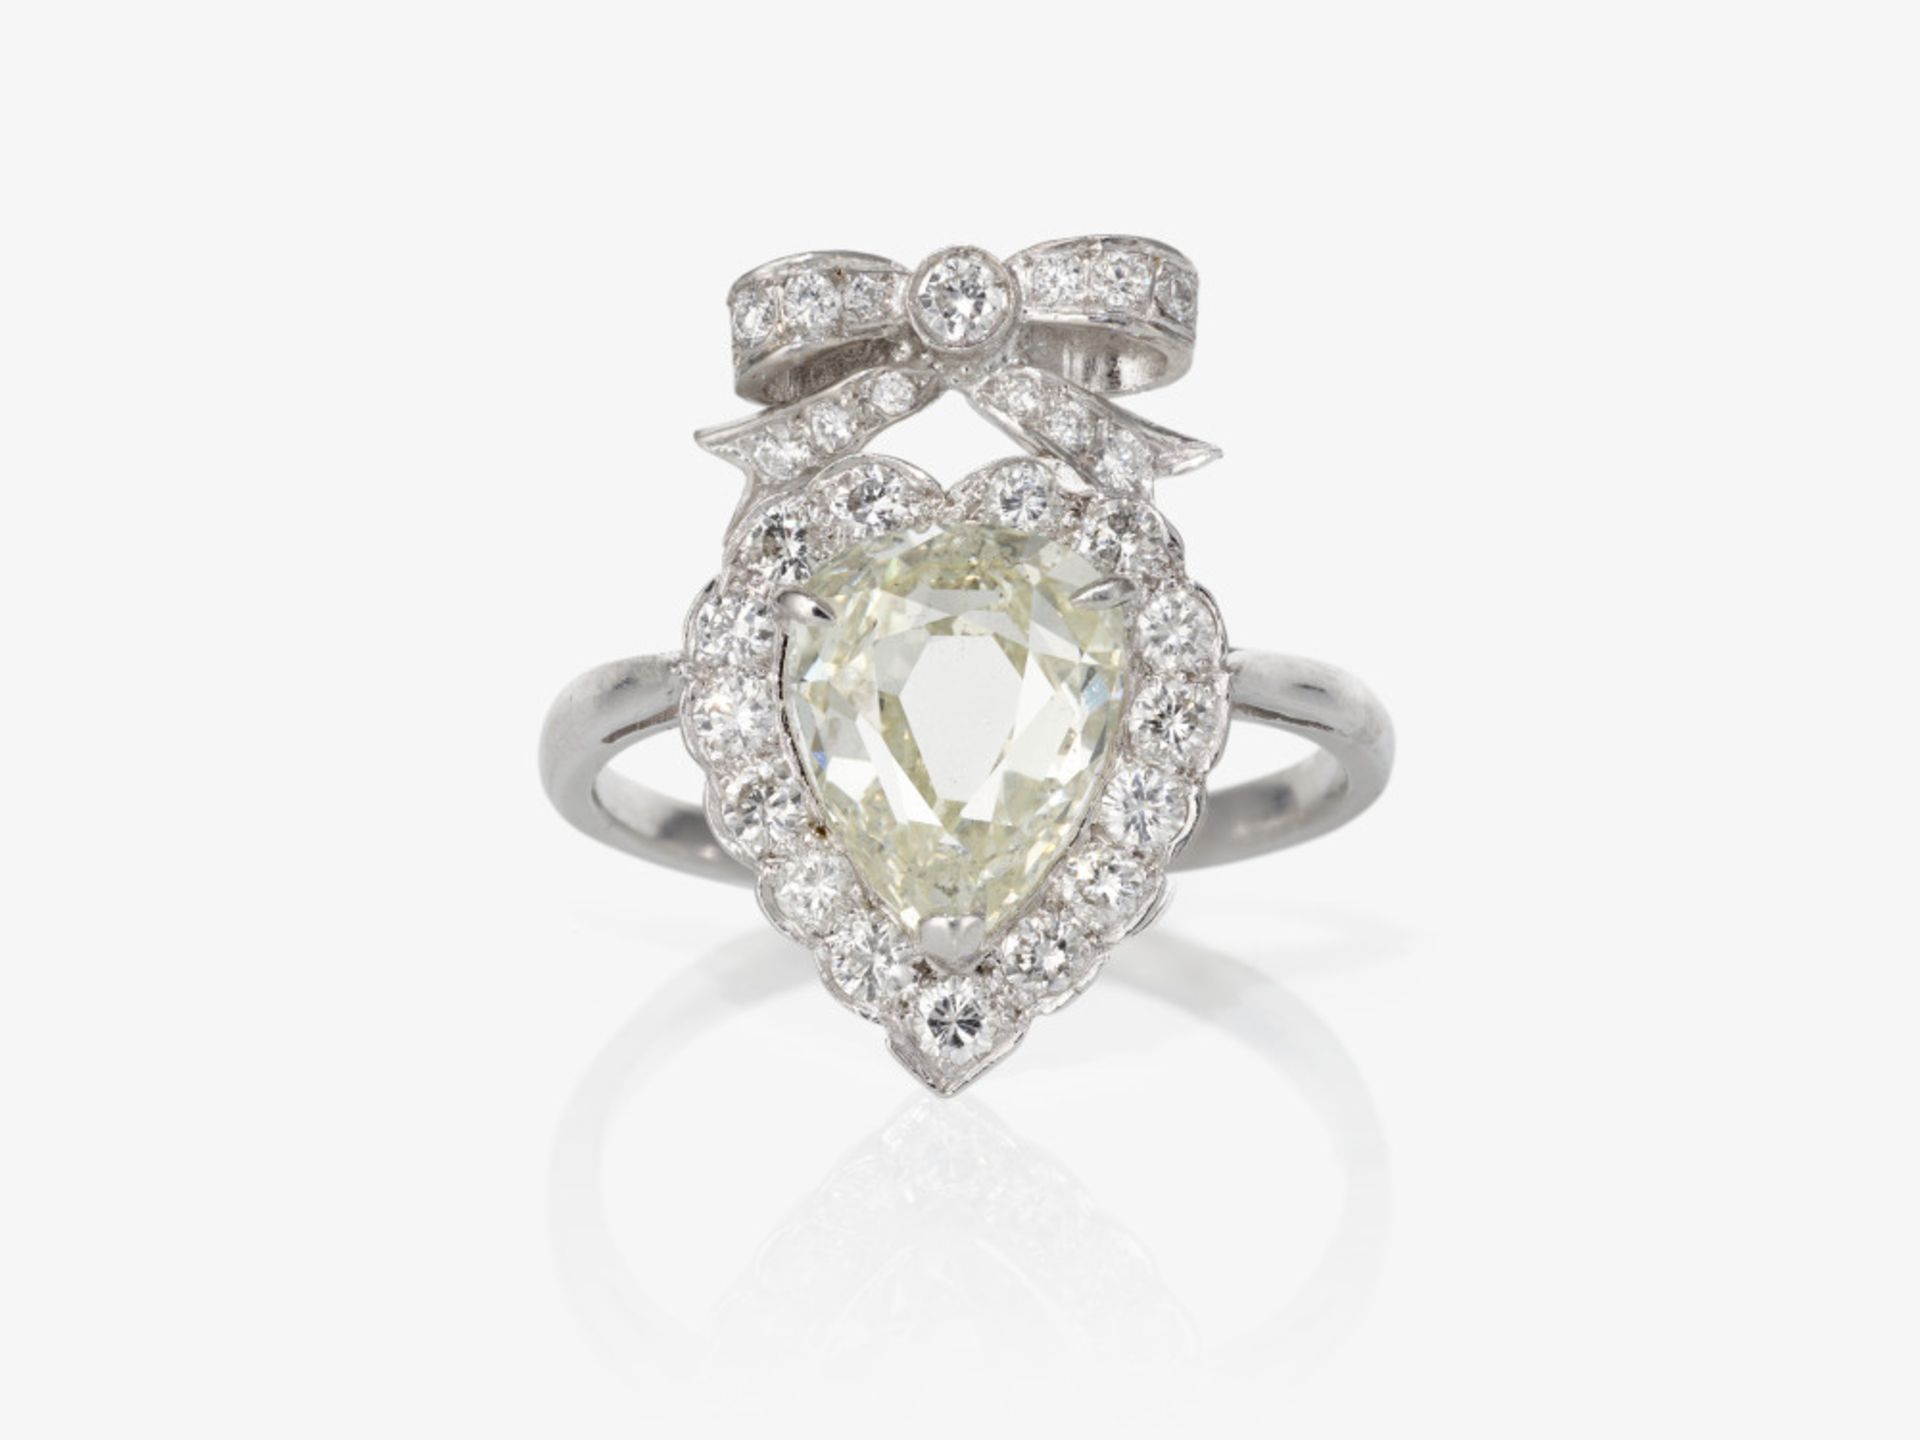 A ring with a pear shaped diamond and brilliant-cut diamonds - Image 2 of 2